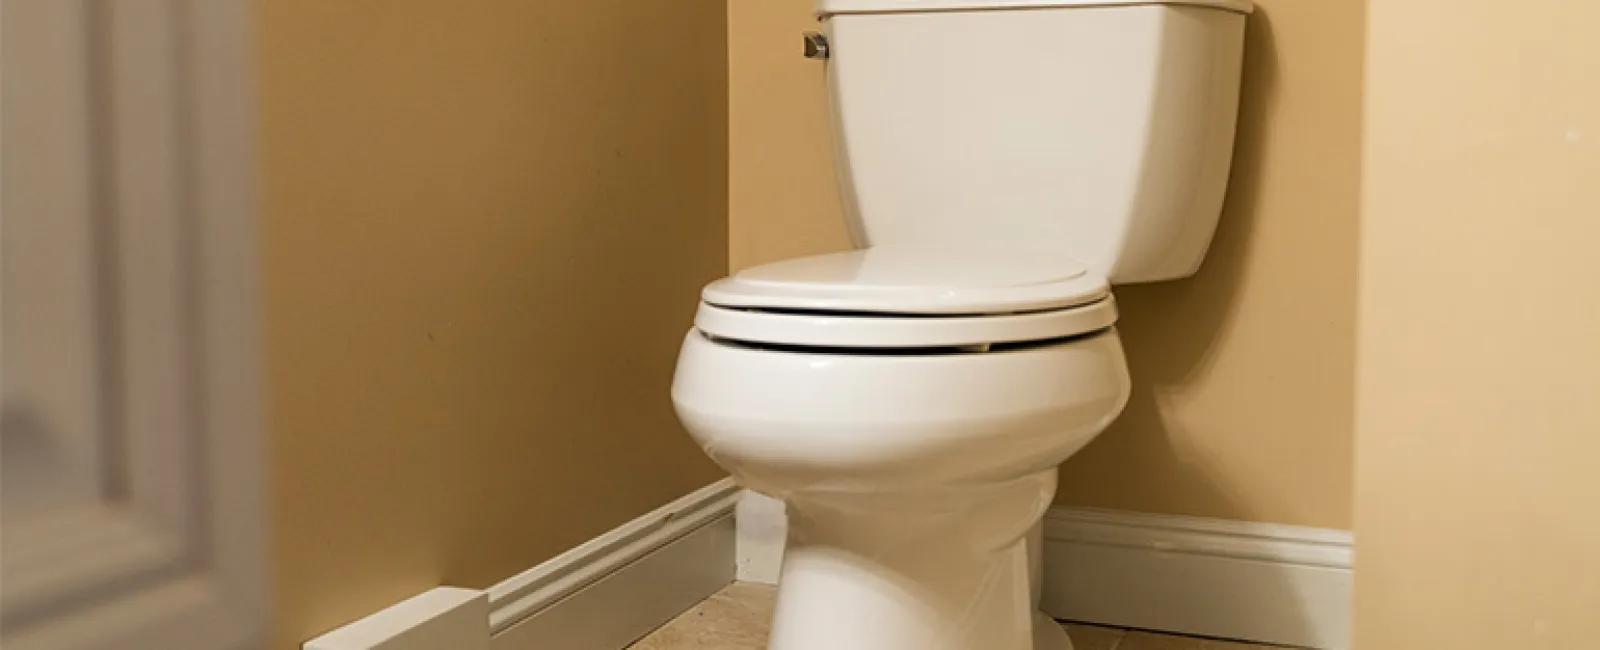 How to Install a Toilet Seat?